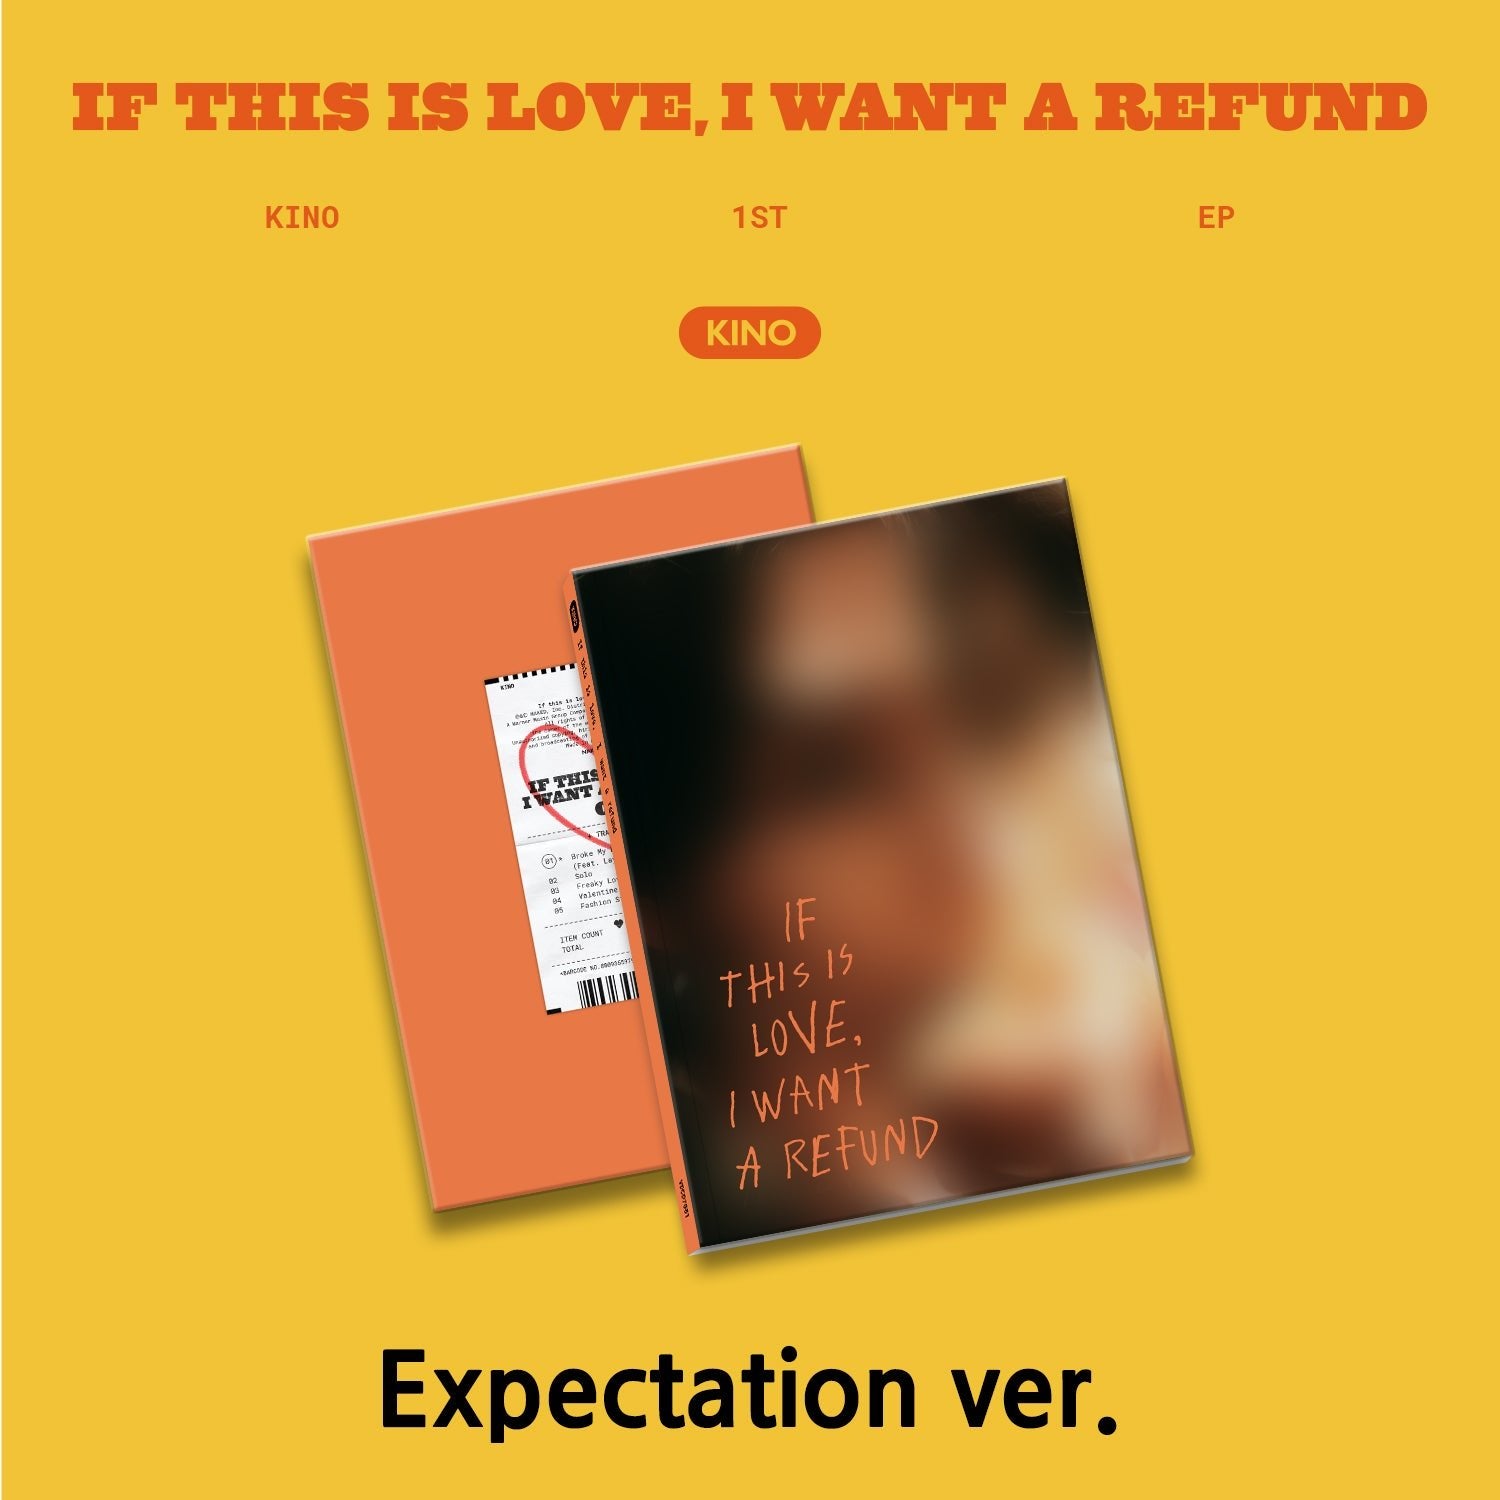 KINO - [If this is love, I want a refund] Expectation ver. Kpop Album - Kpop Wholesale | Seoufly